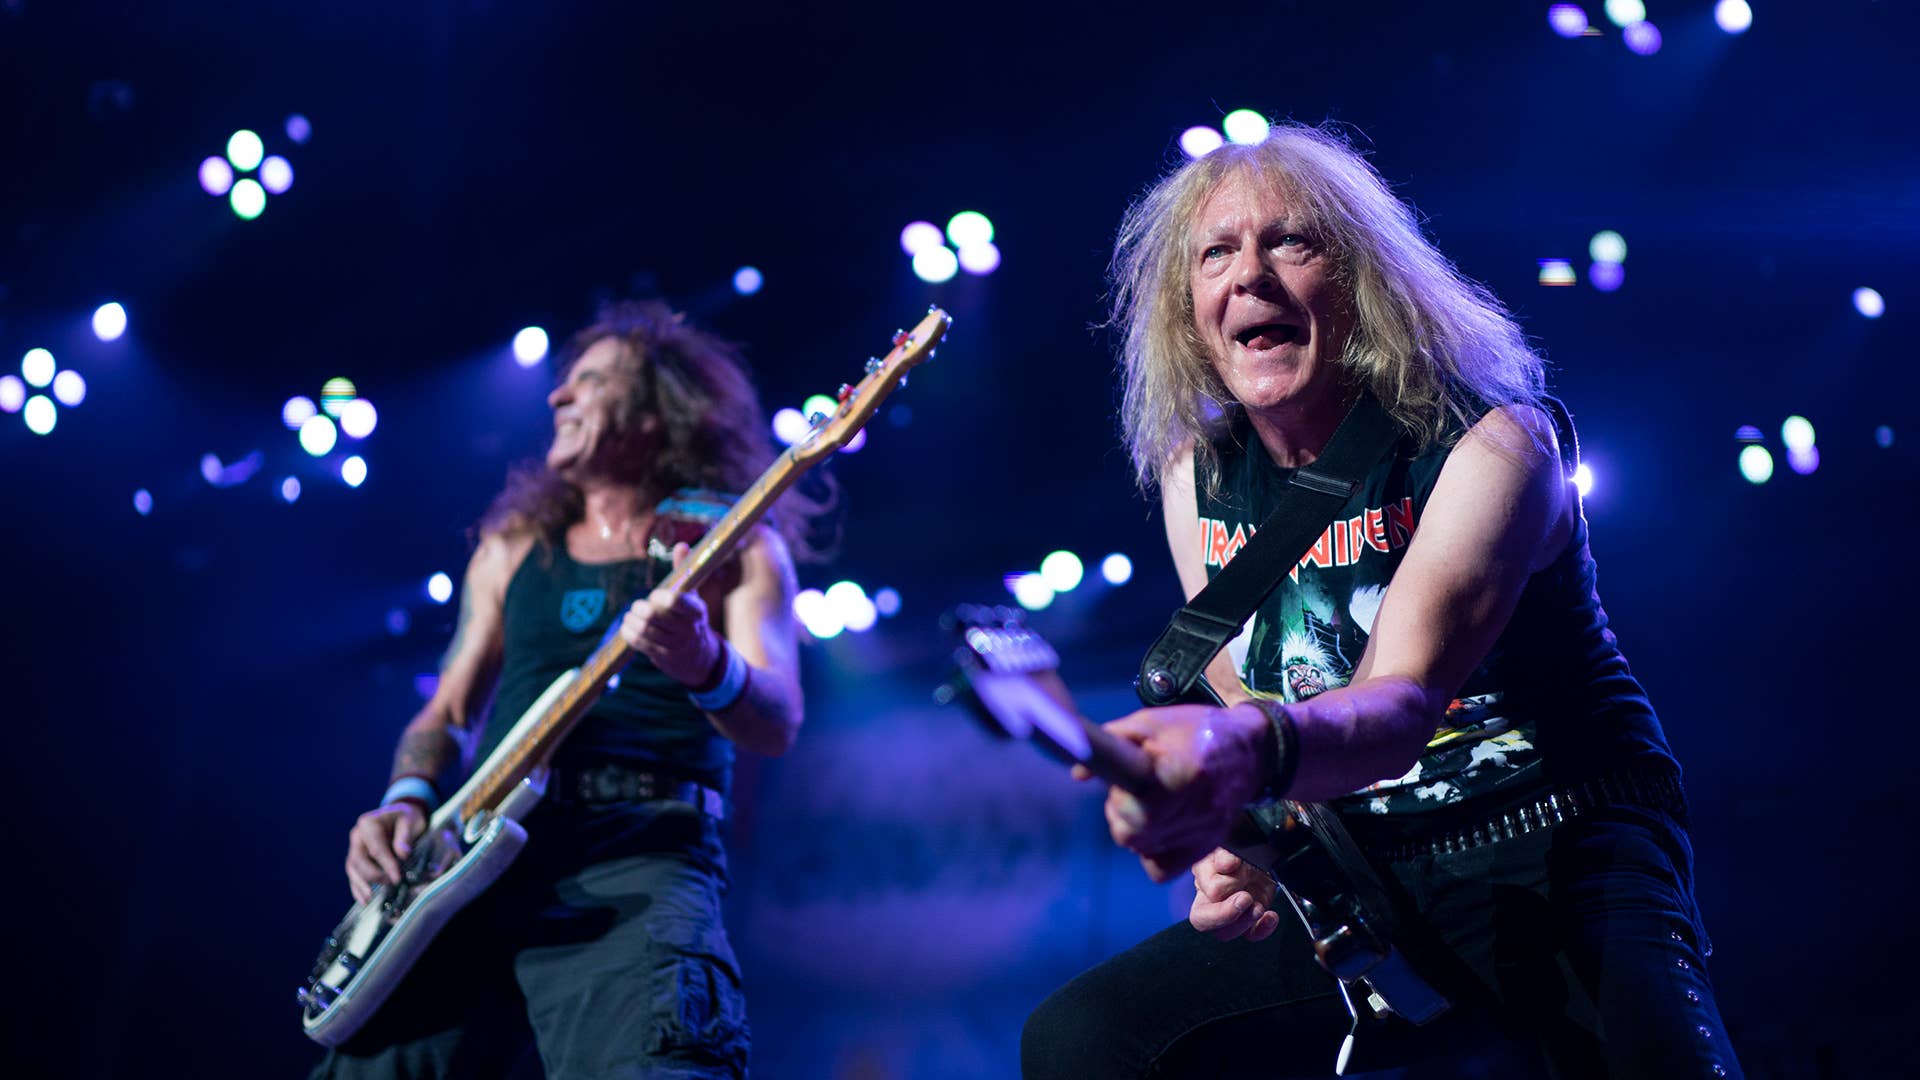 Janick Gers, foreground, with bassist Steve Harris of Iron Maiden perform during the Legacy of the Beast tour at Xcel Energy Center in Saint Paul, Minnesota. (Photo by Jeff Wheeler/Star Tribune via Getty Images)